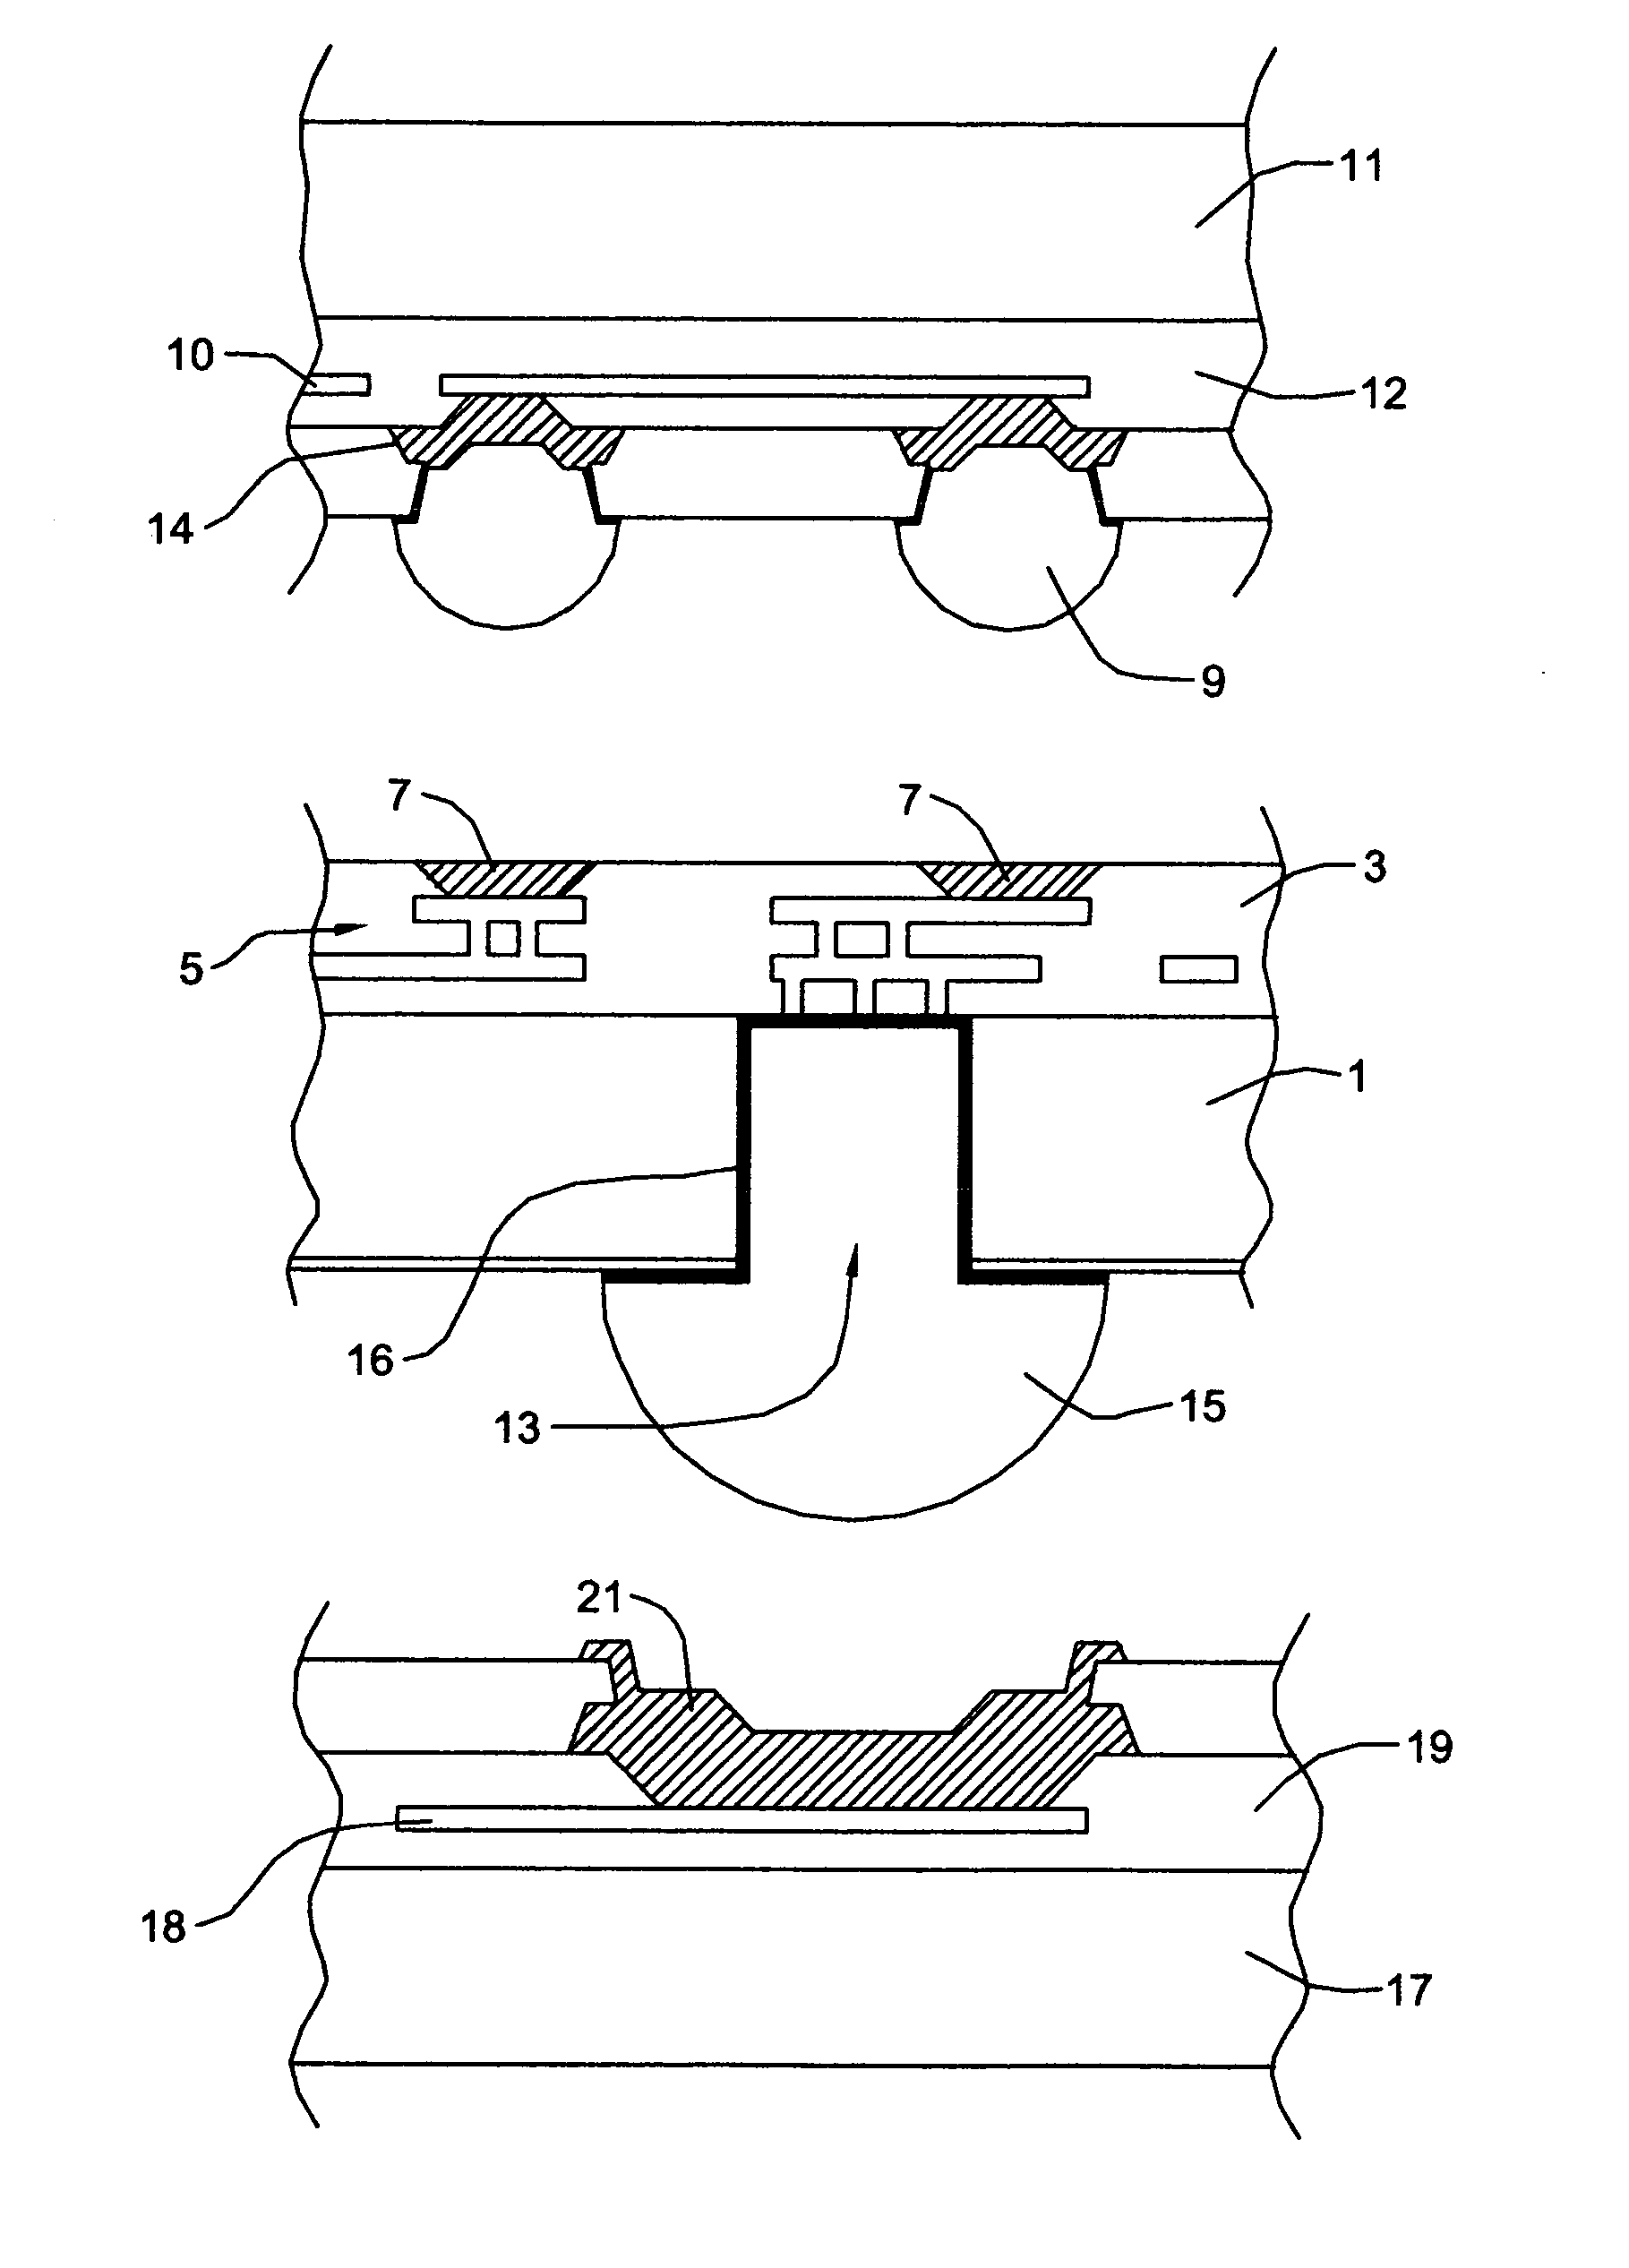 Conductive through via structure and process for electronic device carriers